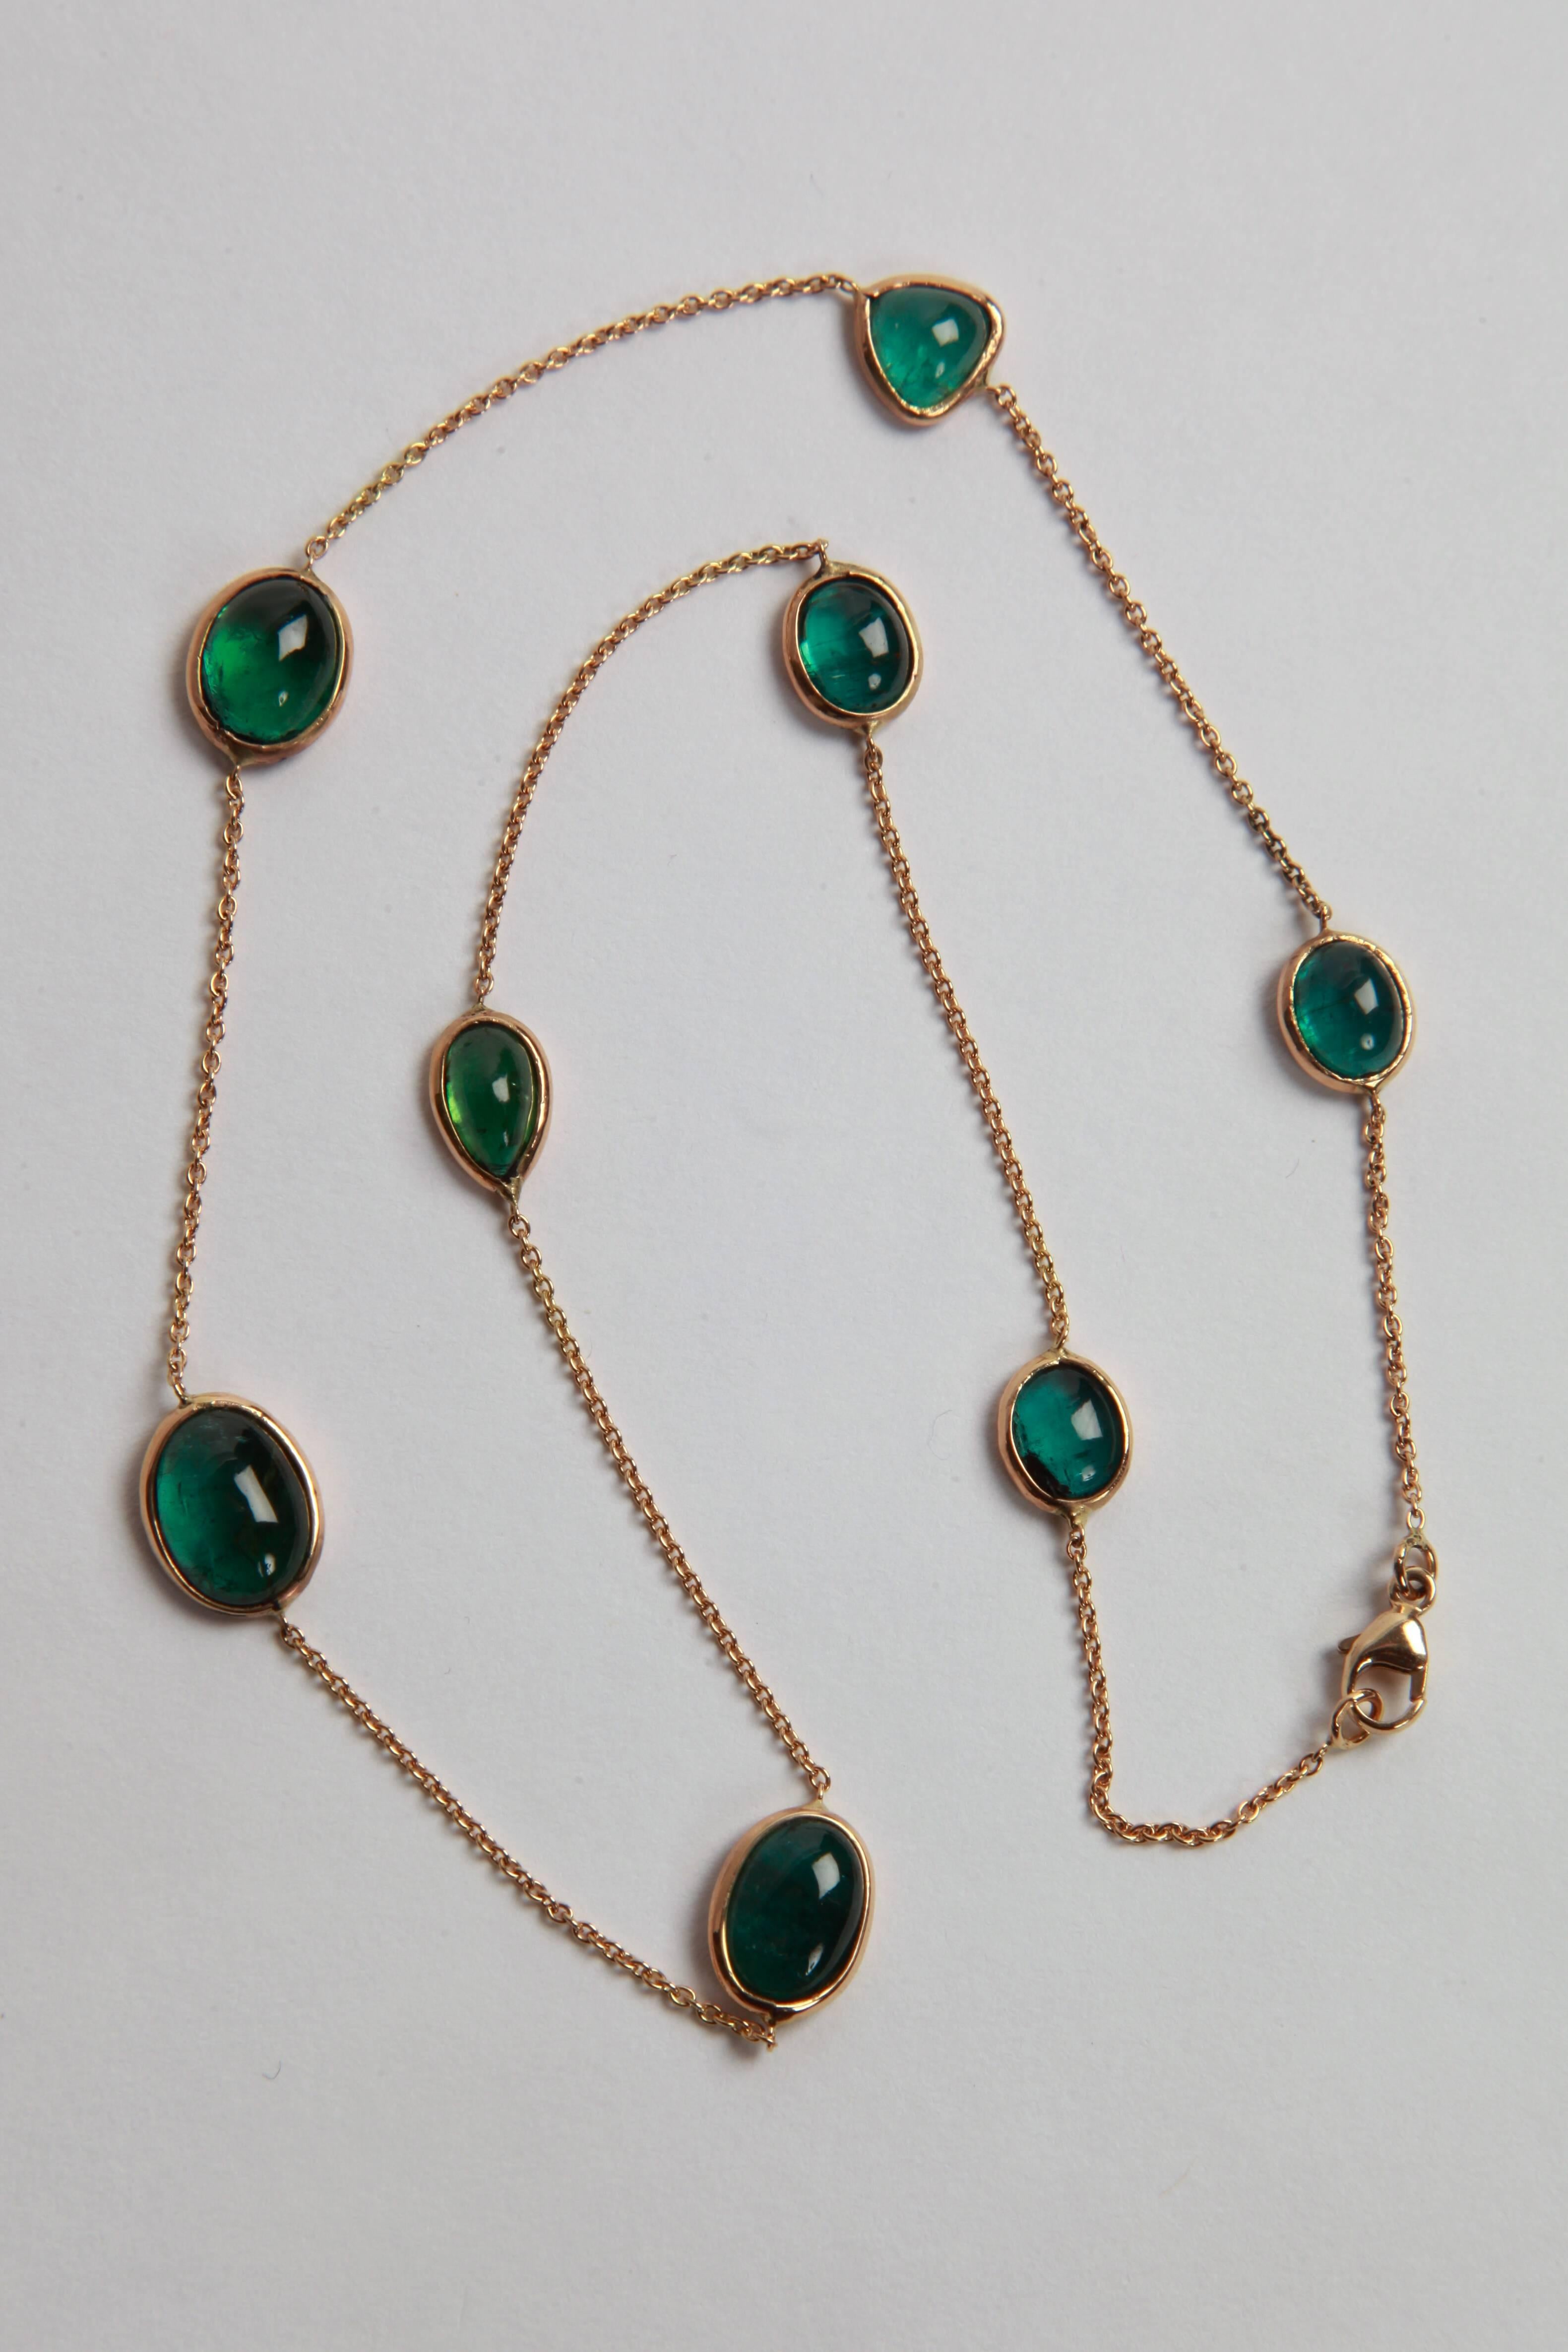 Women's Green Tourmaline Cabochons and Yellow Gold Necklace by Marion Jeantet